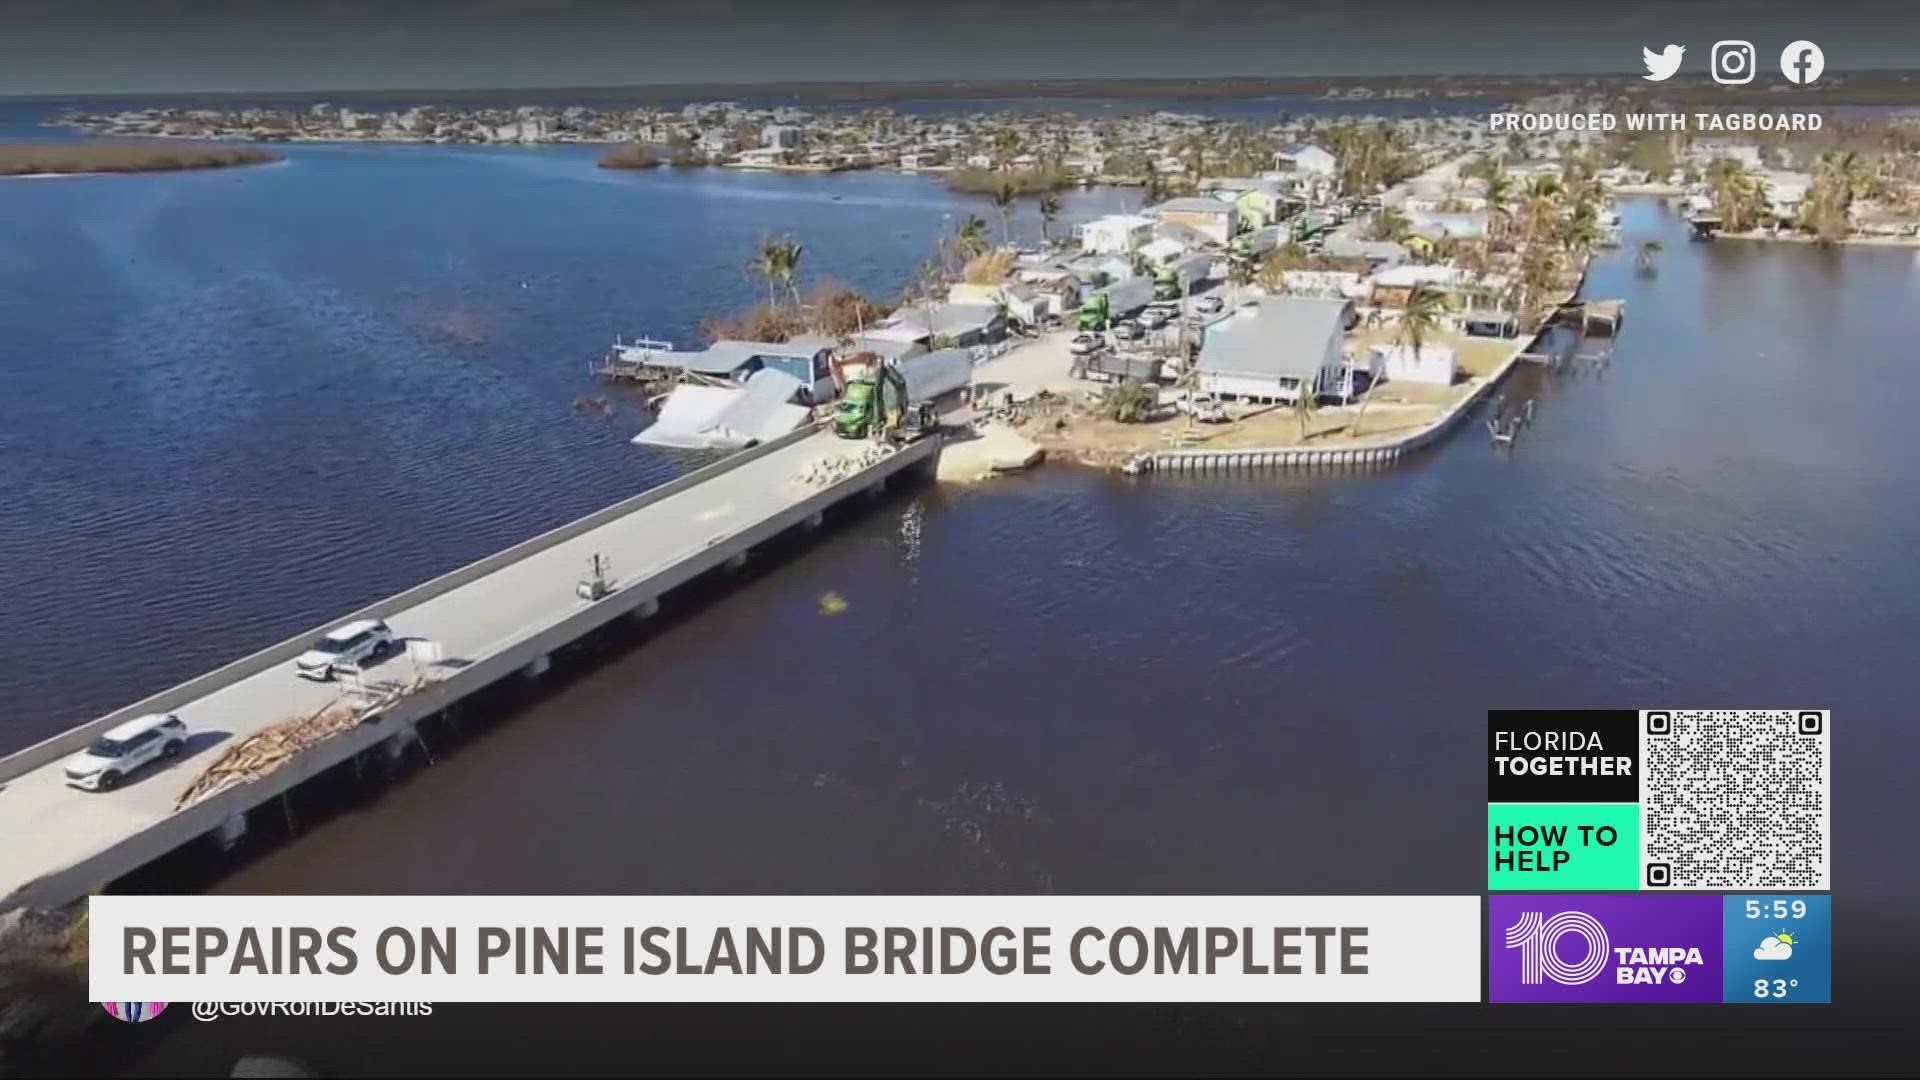 Gov. DeSantis tweeted out a short video, showing a bridge now open to reach Pine Island.